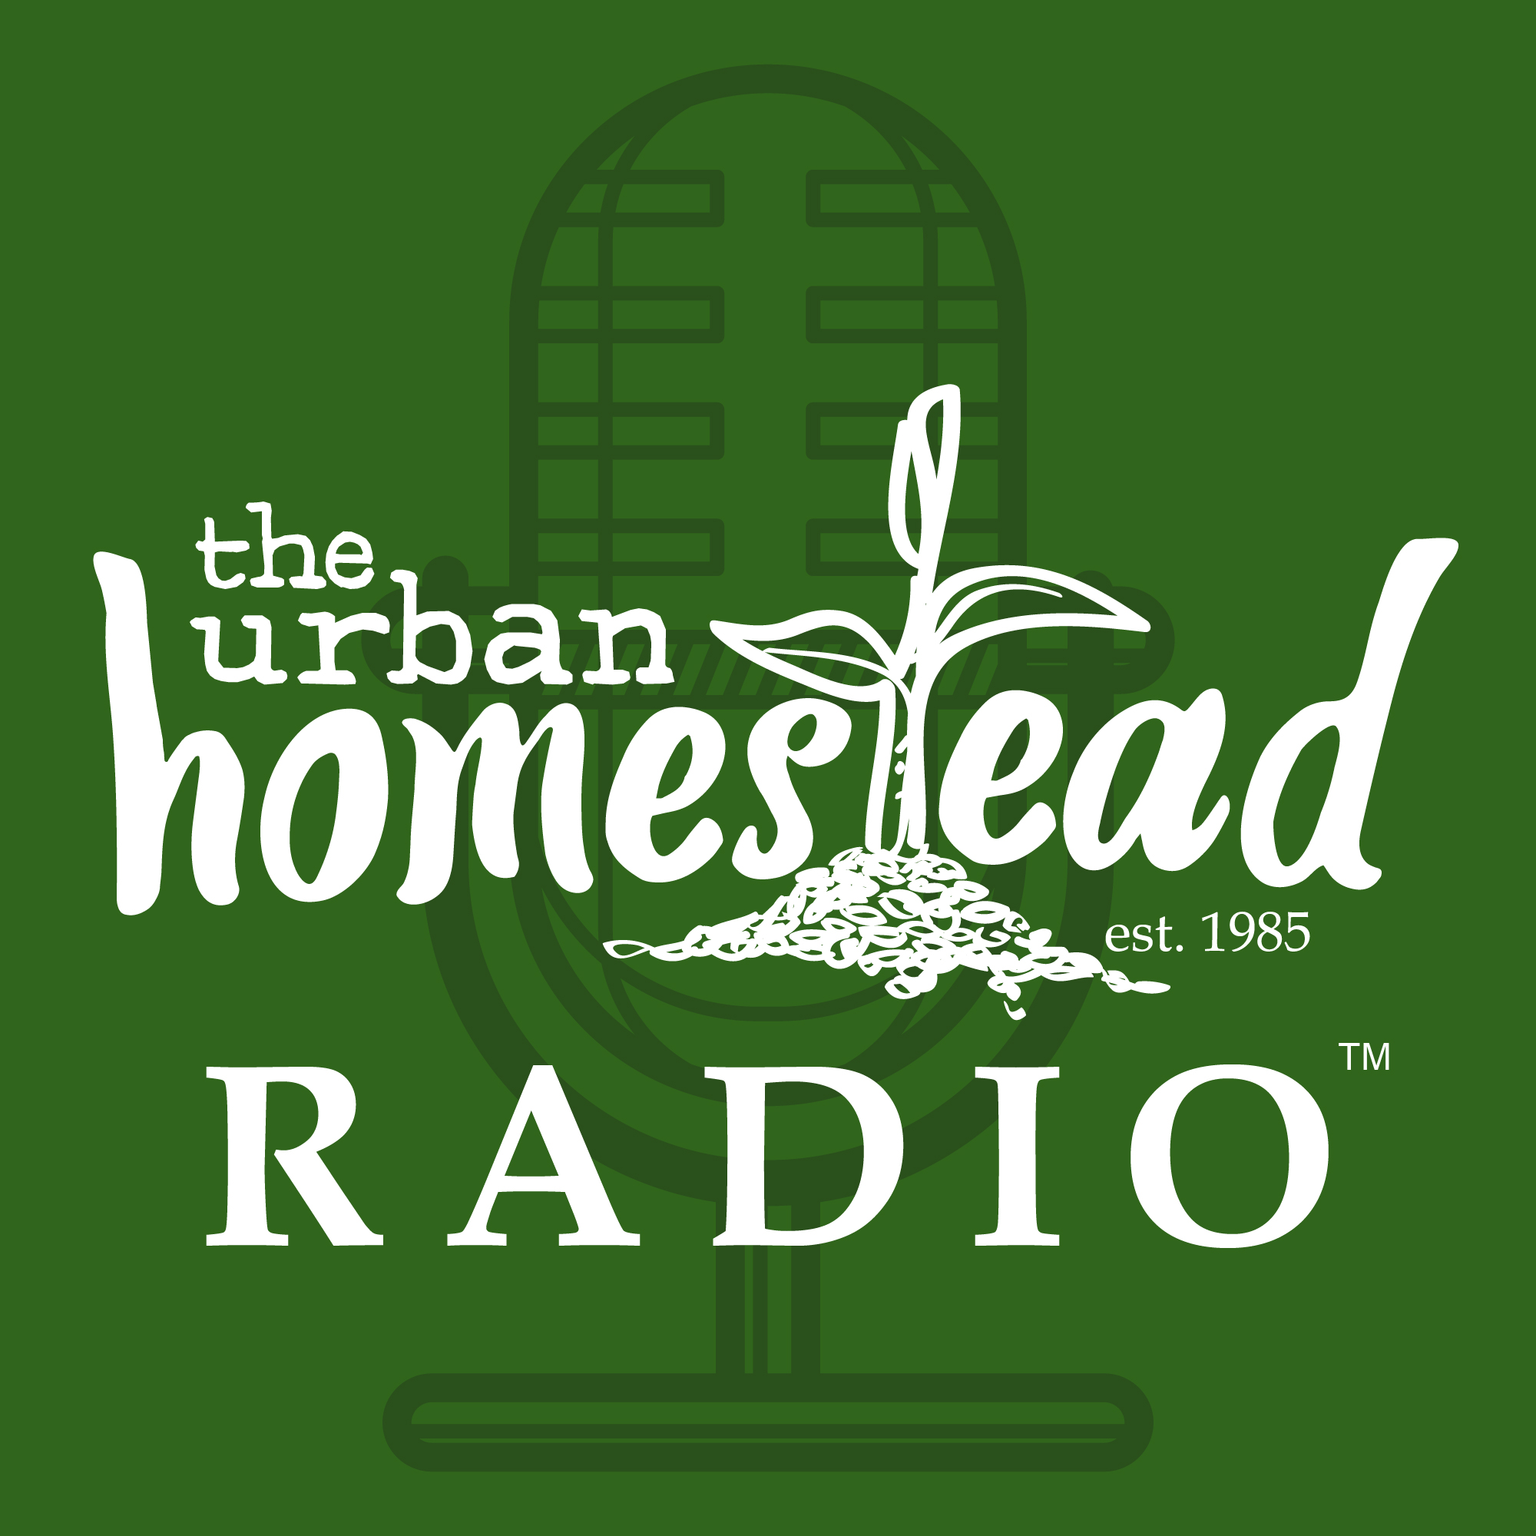 Urban Homestead Radio Episode 65: Hot Time, Summer in the City